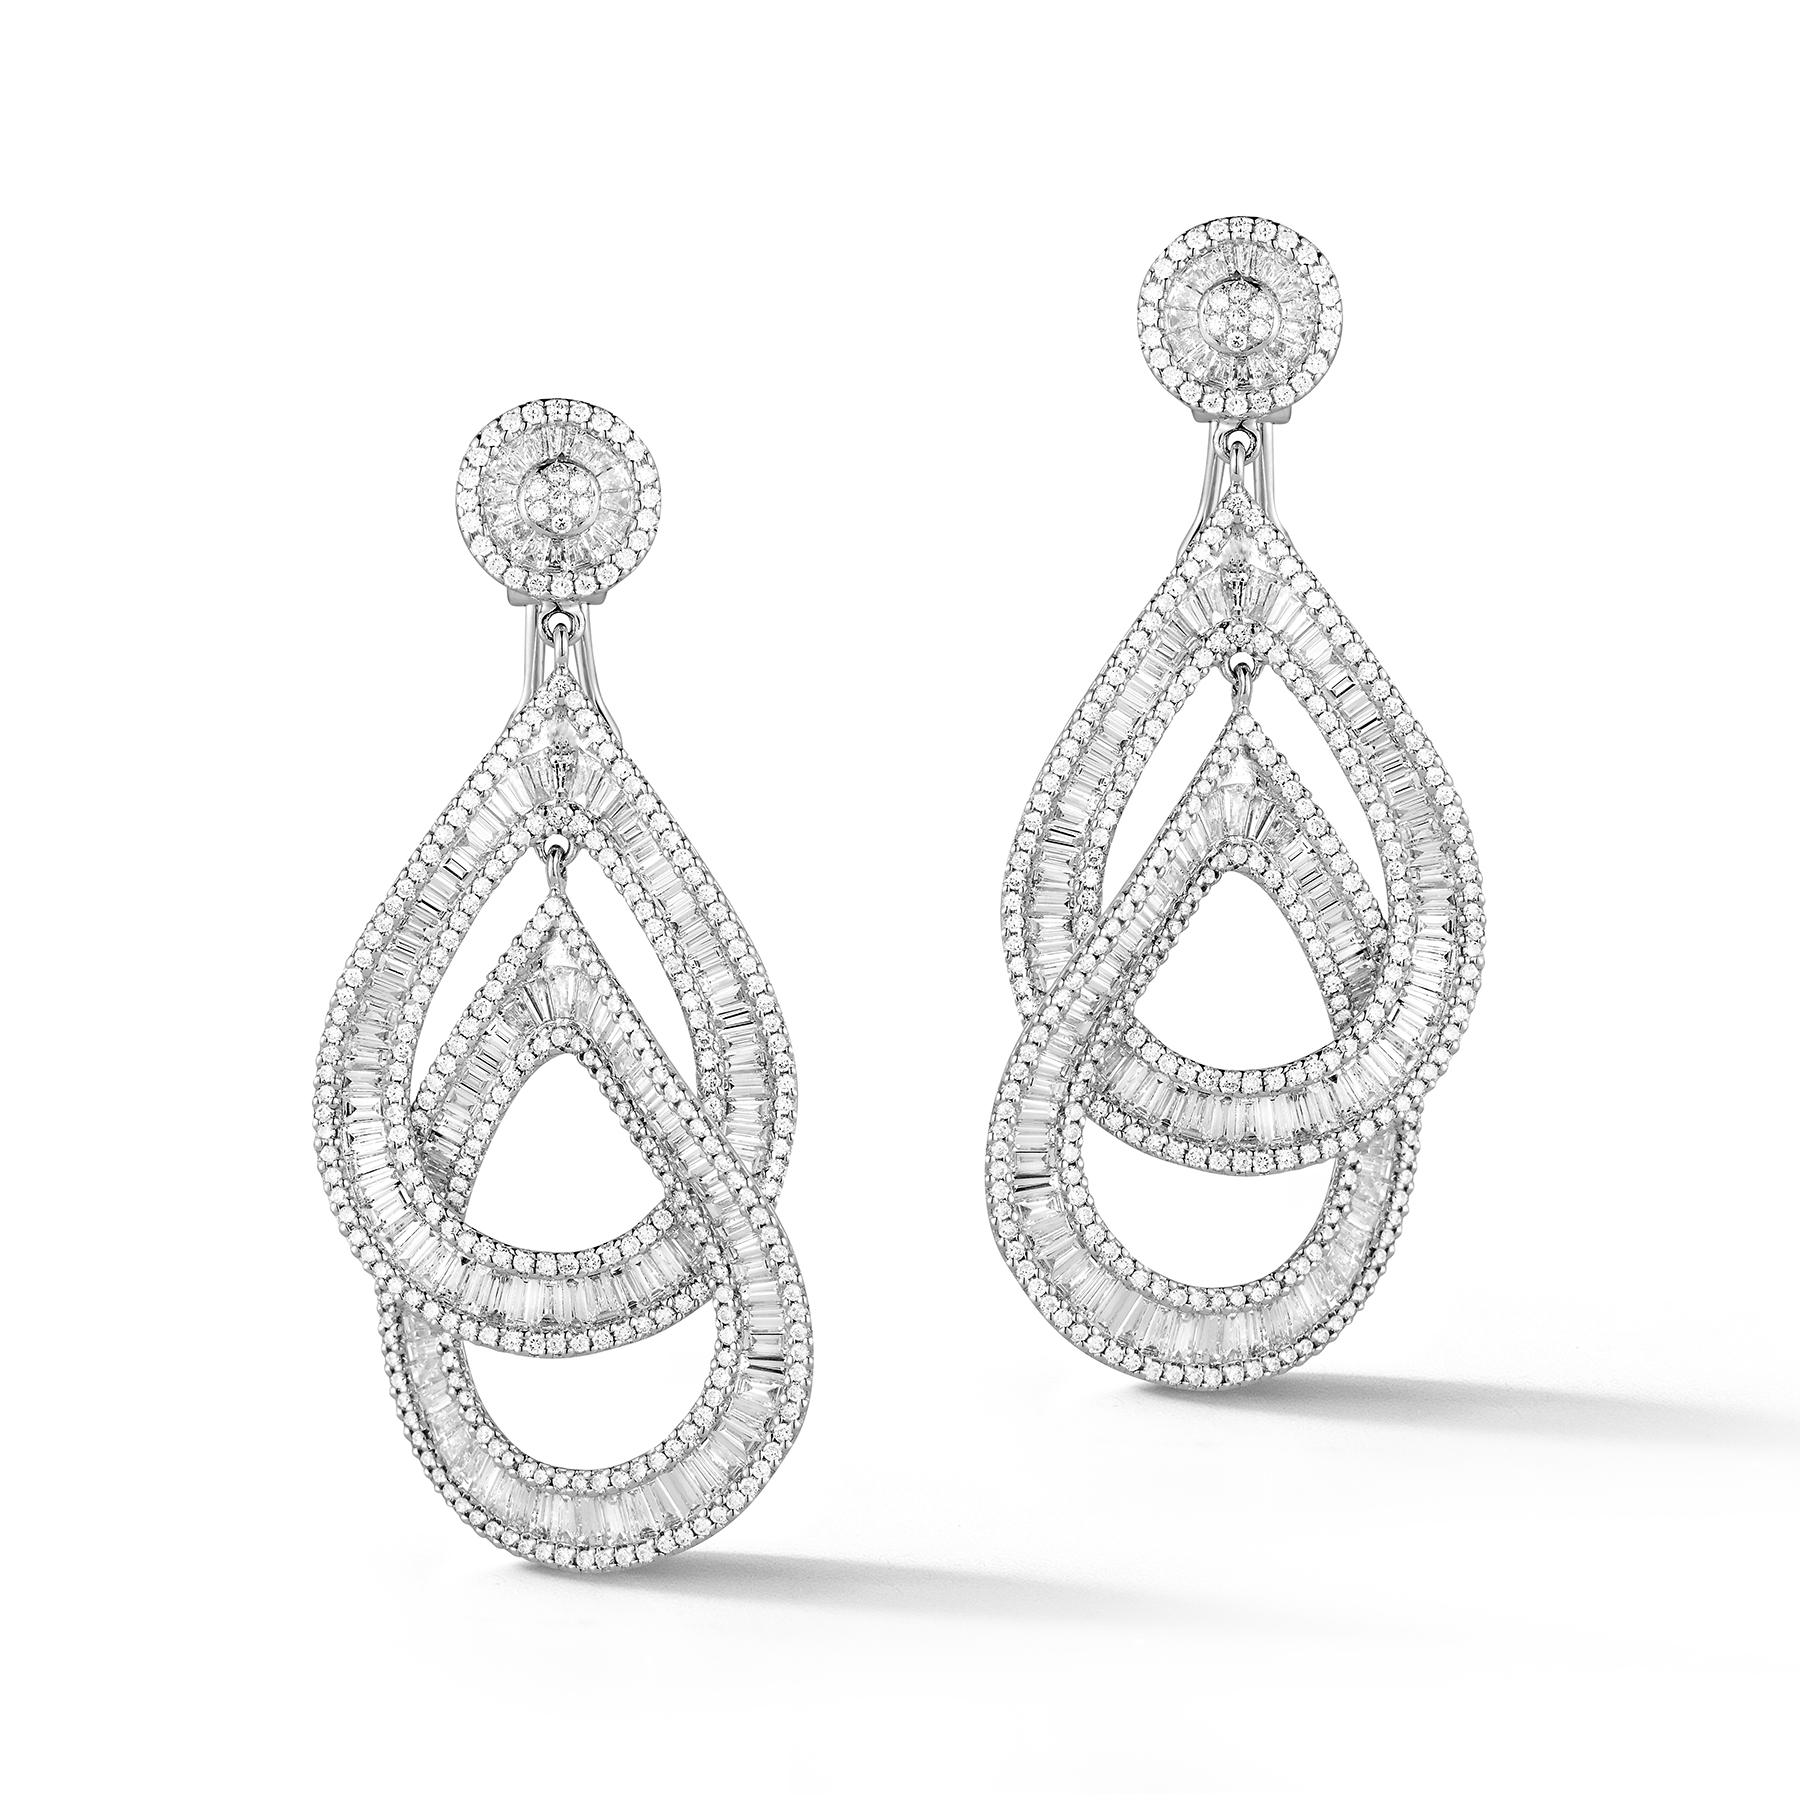 Stunning 18K White Gold Dangle Earrings with a Dazzling 610 White Round Diamonds weighing 3.71 Carats and 263 White Baguette Diamonds weighing 9.06 Carats.